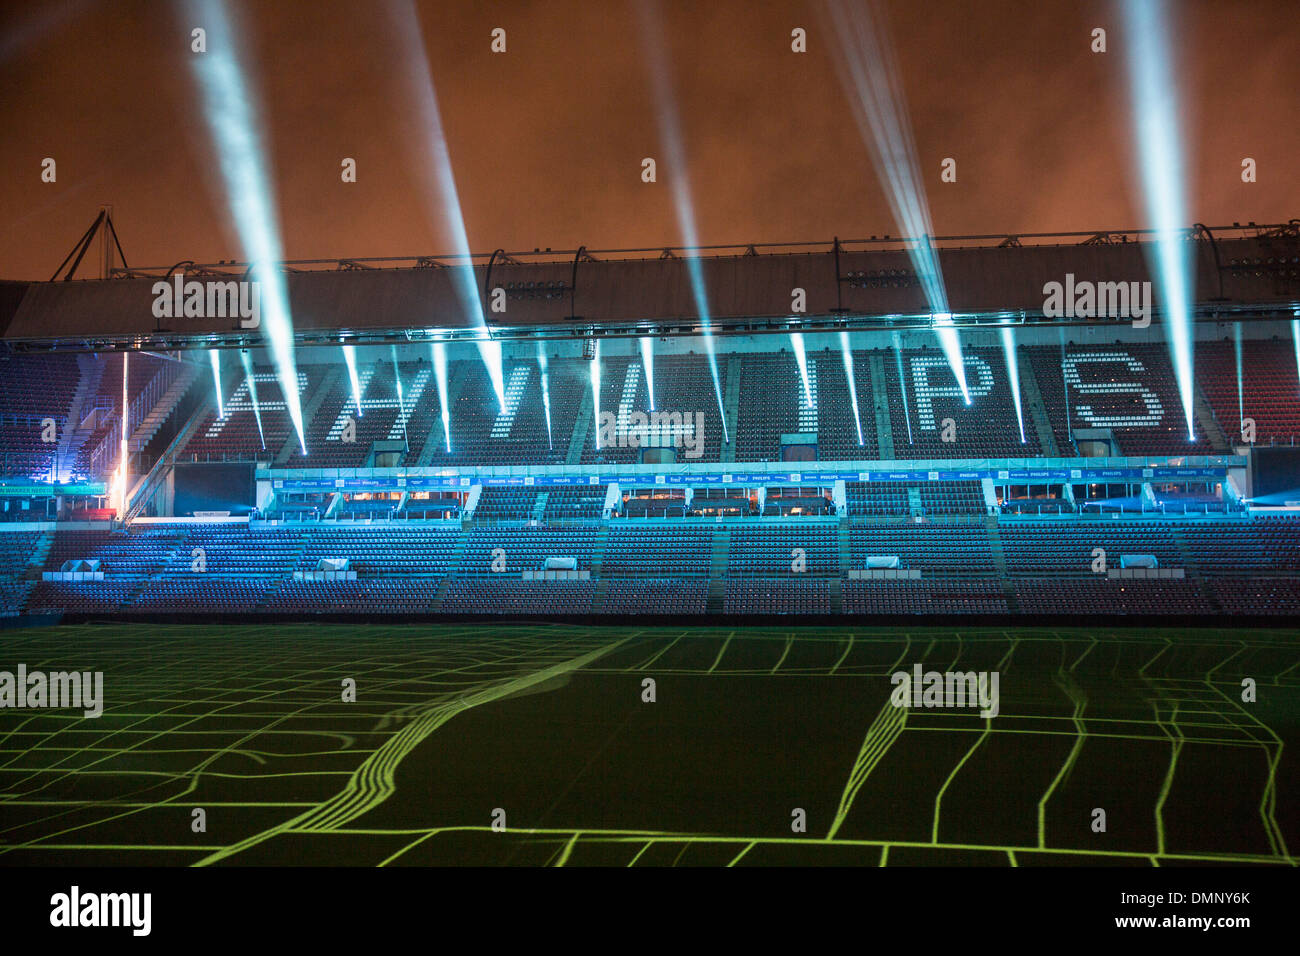 Netherlands, Eindhoven, Light festival called GLOW 2013. Project Clashlight in the Philips PSV football stadium Stock Photo